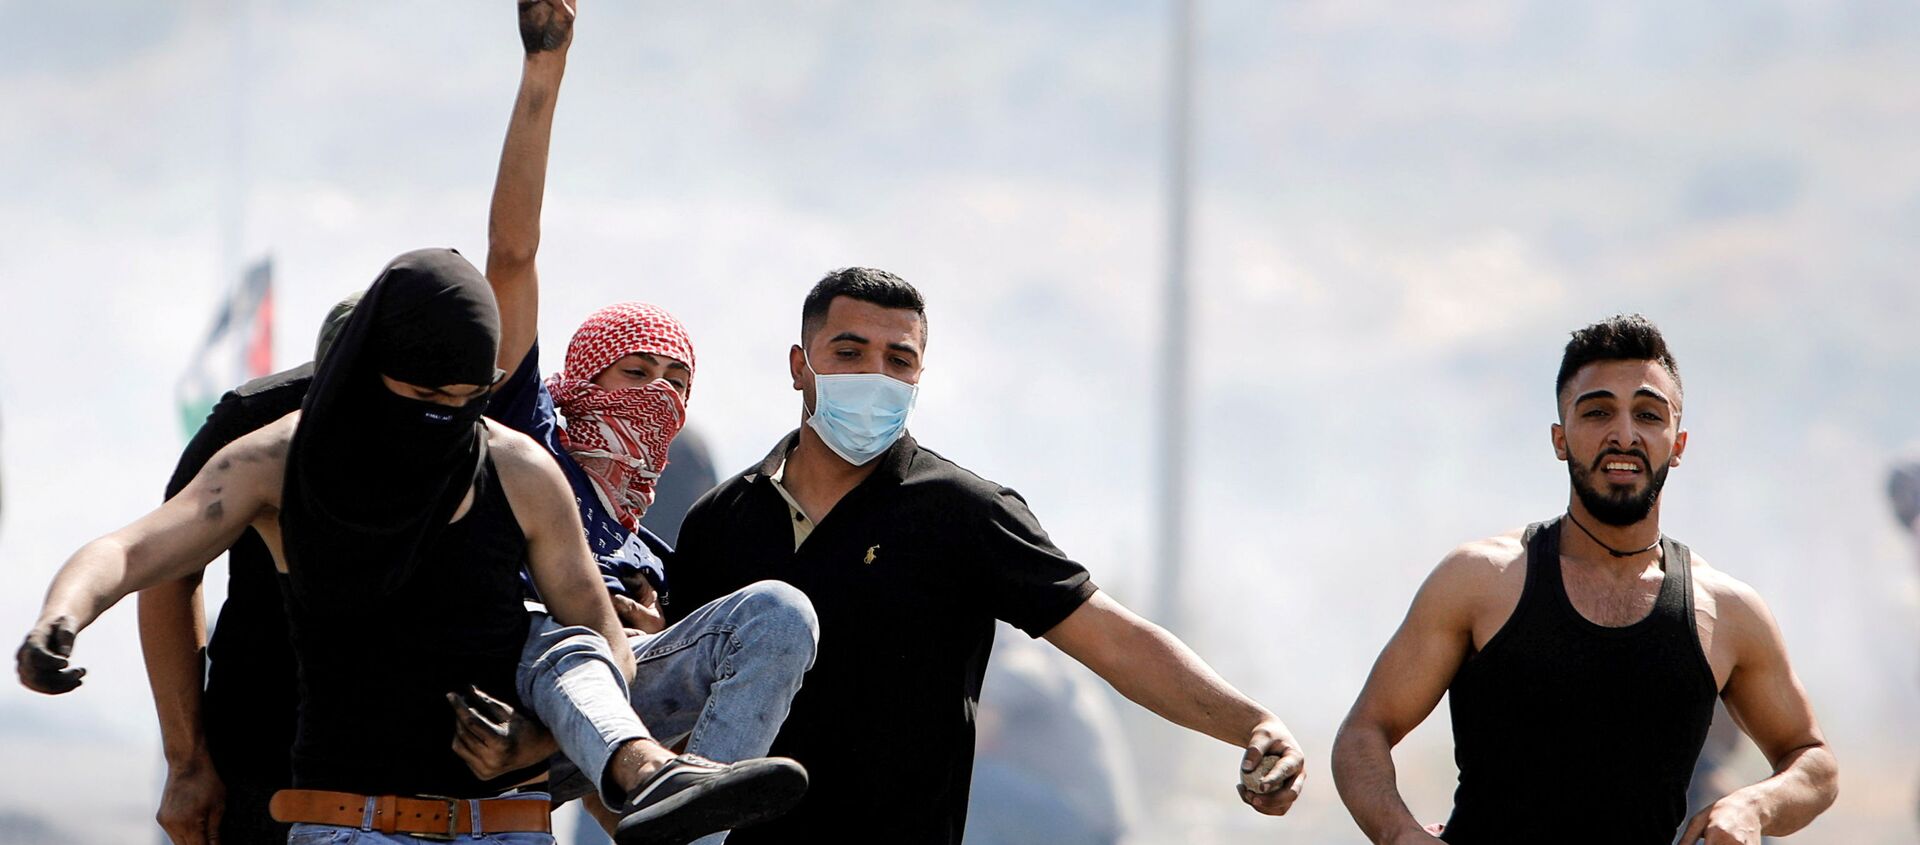 An injured Palestinian demonstrator gestures as he is evacuated during clashes with Israeli forces at a protest over tension in Jerusalem and Israel-Gaza escalation, near Hawara checkpoint near Nablus in the Israeli-occupied West Bank, May 14, 2021. - Sputnik International, 1920, 15.05.2021